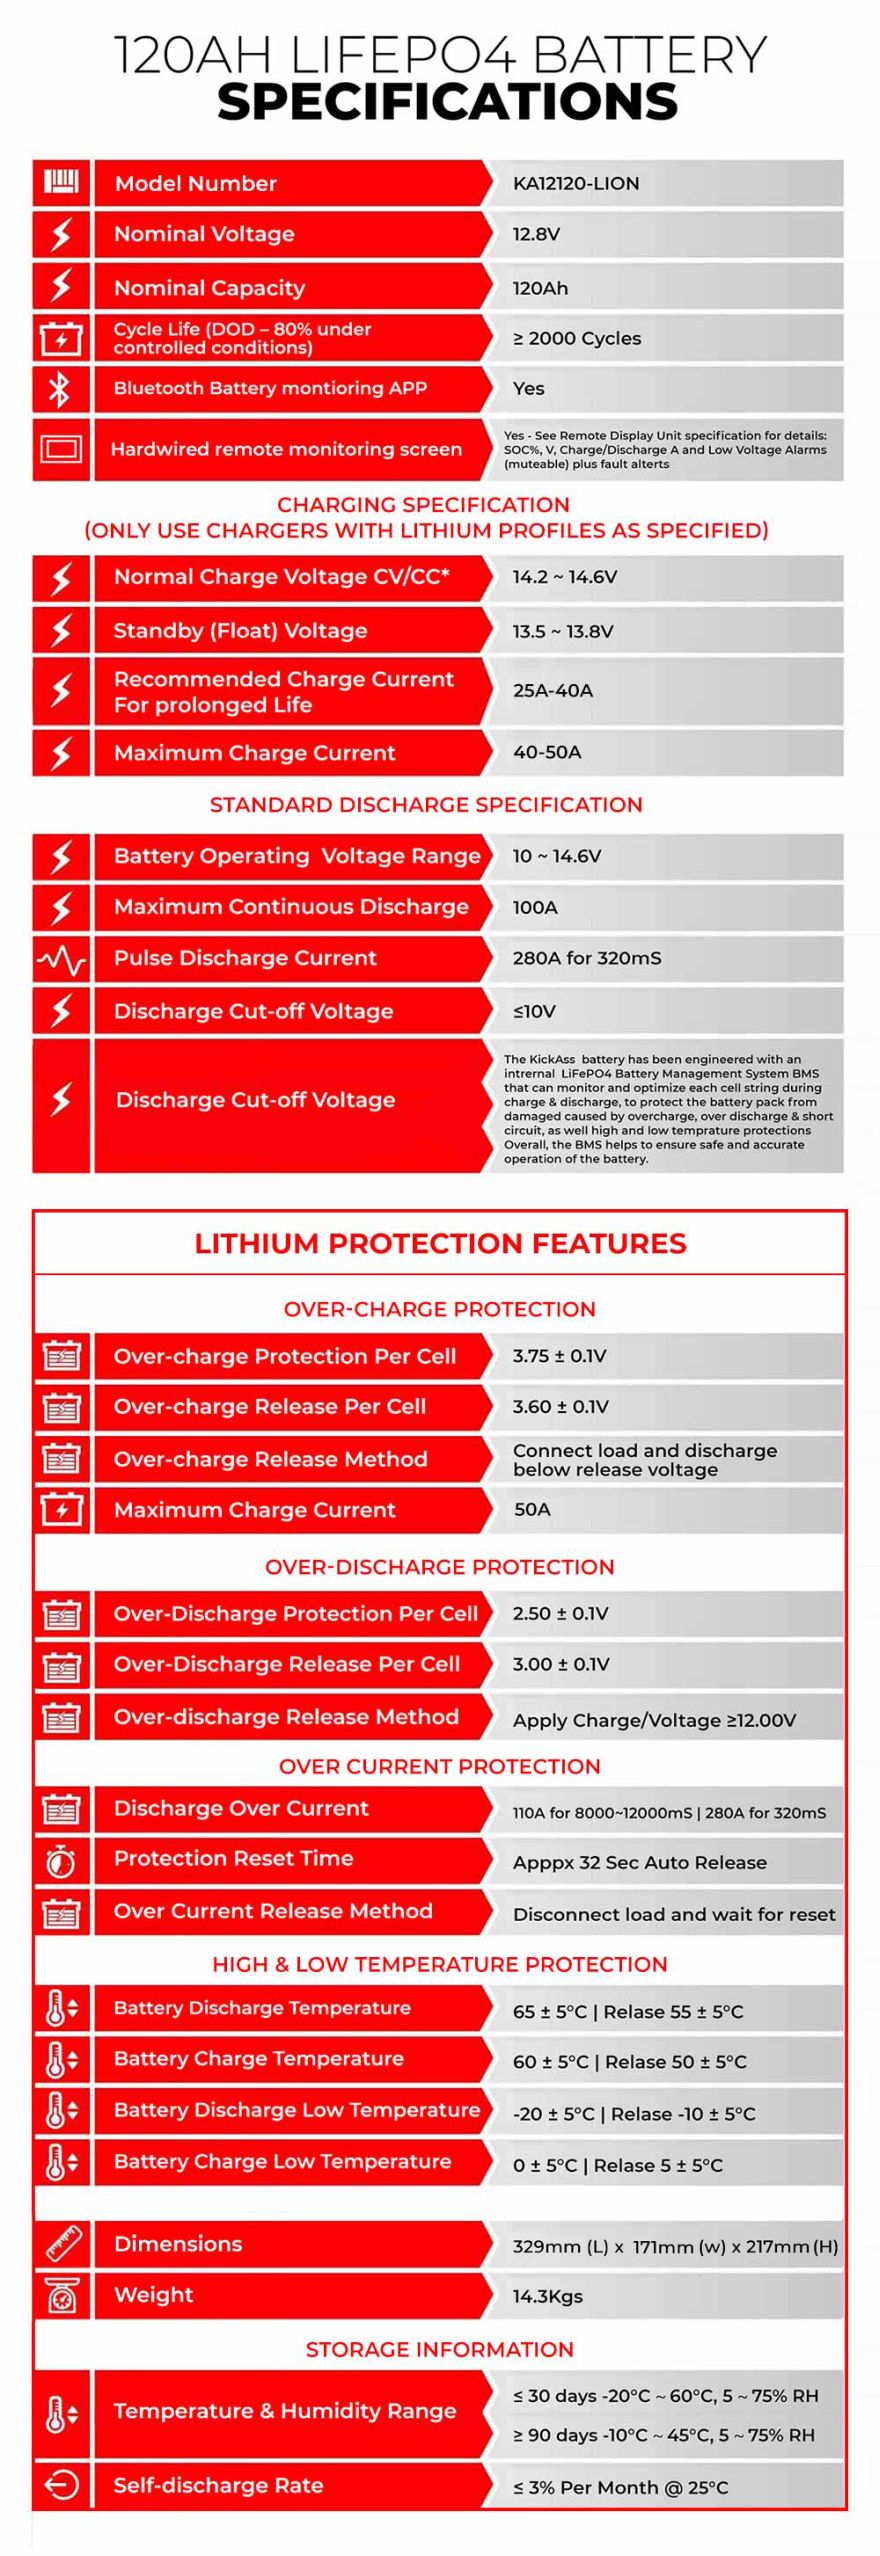 120Ah LIFEPO4 battery specifications